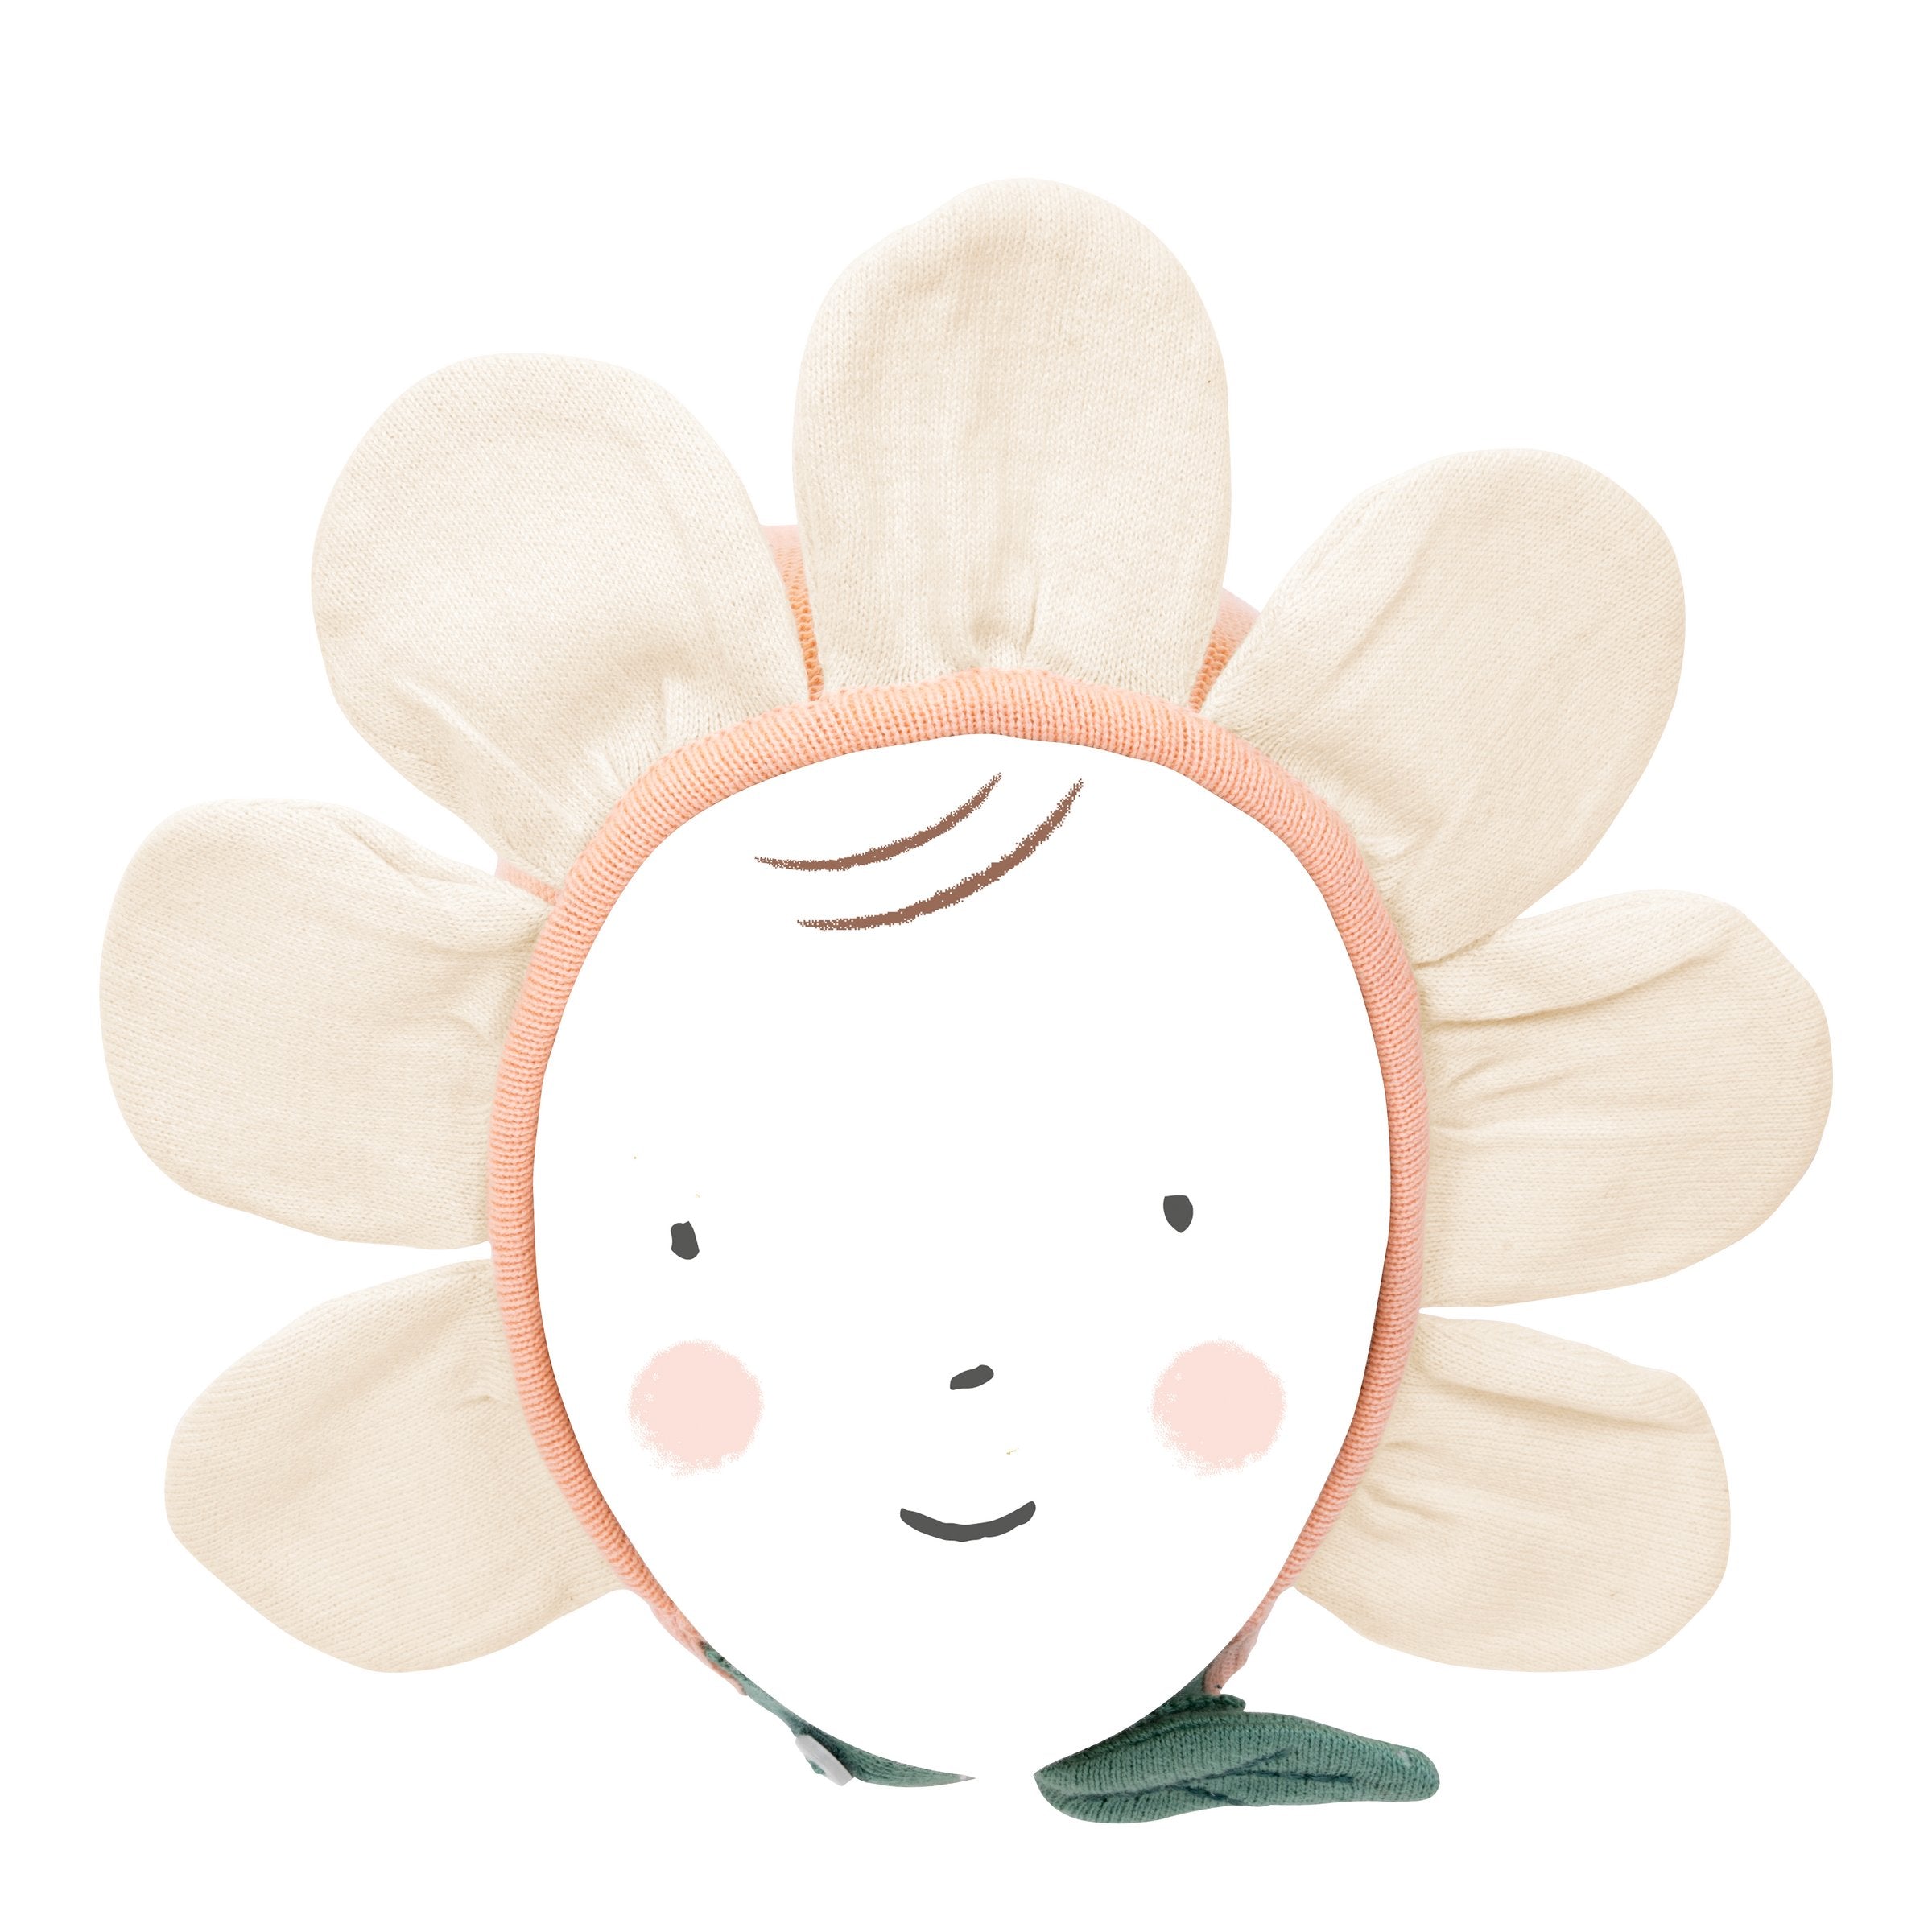 This peach daisy baby bonnet is crafted from organic cotton, with cream petals, green leaf detail and ivory coloured buttons.